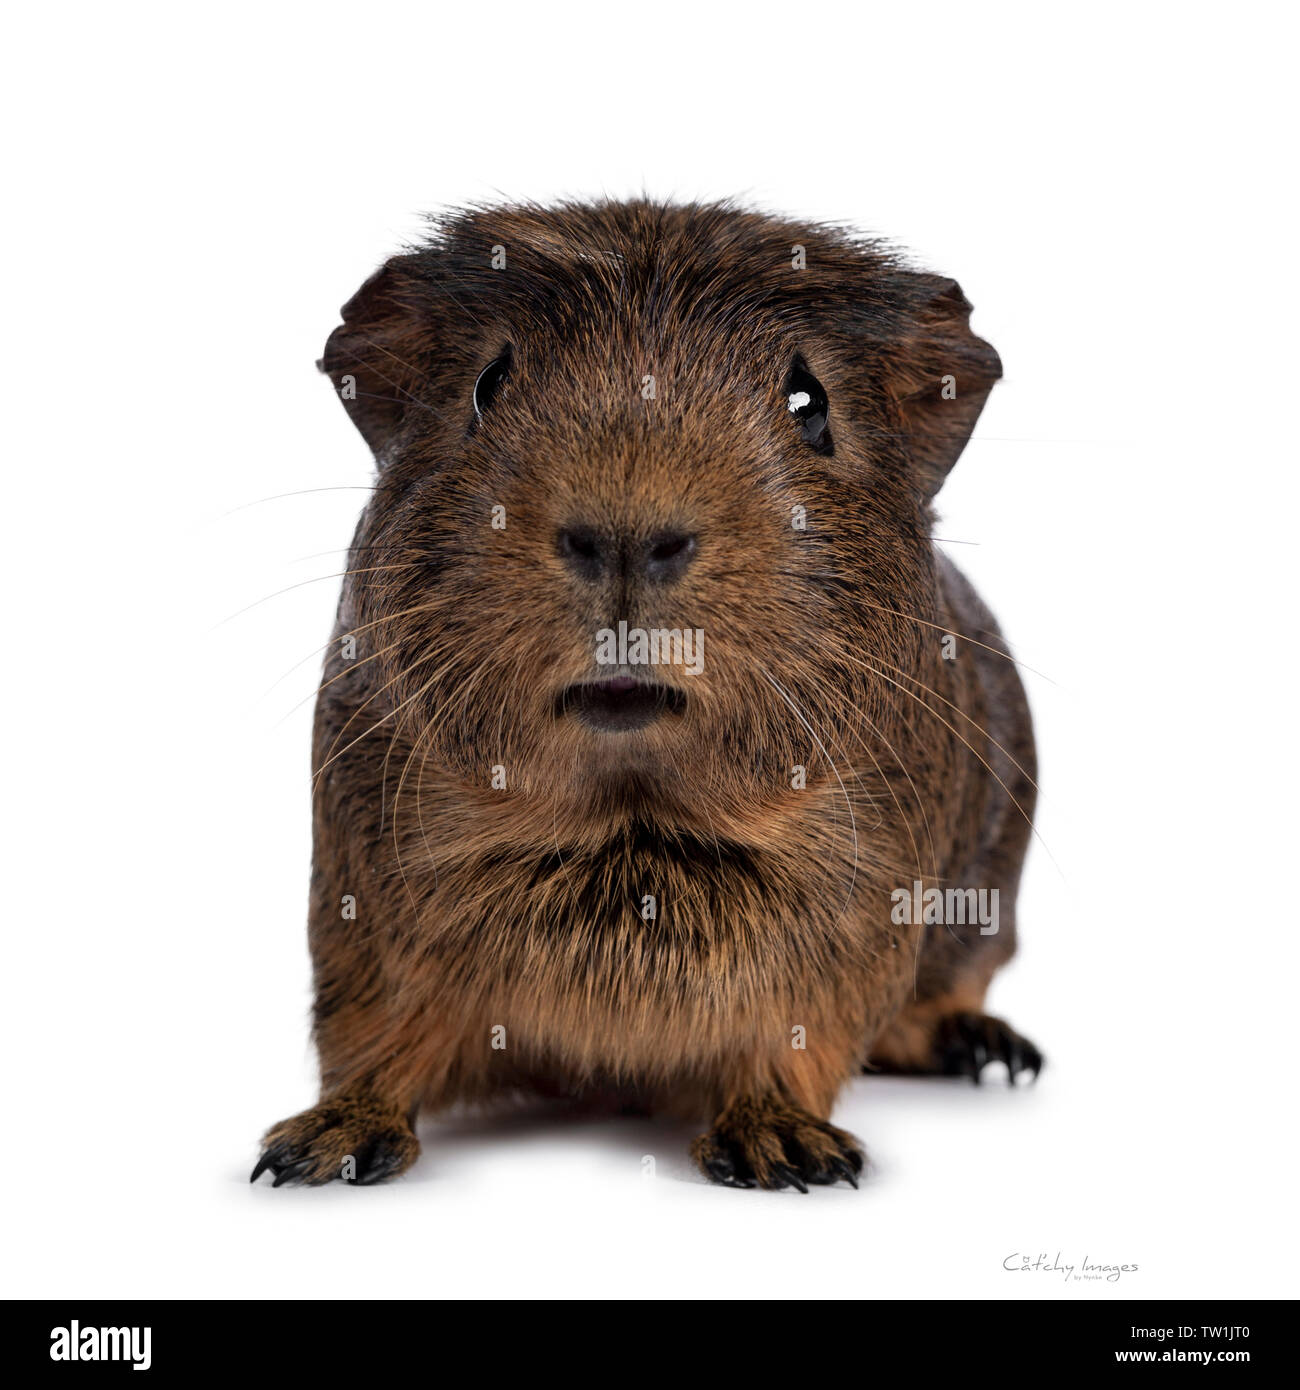 Cute crested cavy, standing facing front. Looking towards camera. Isolated on white background. Mouth silly open. Stock Photo